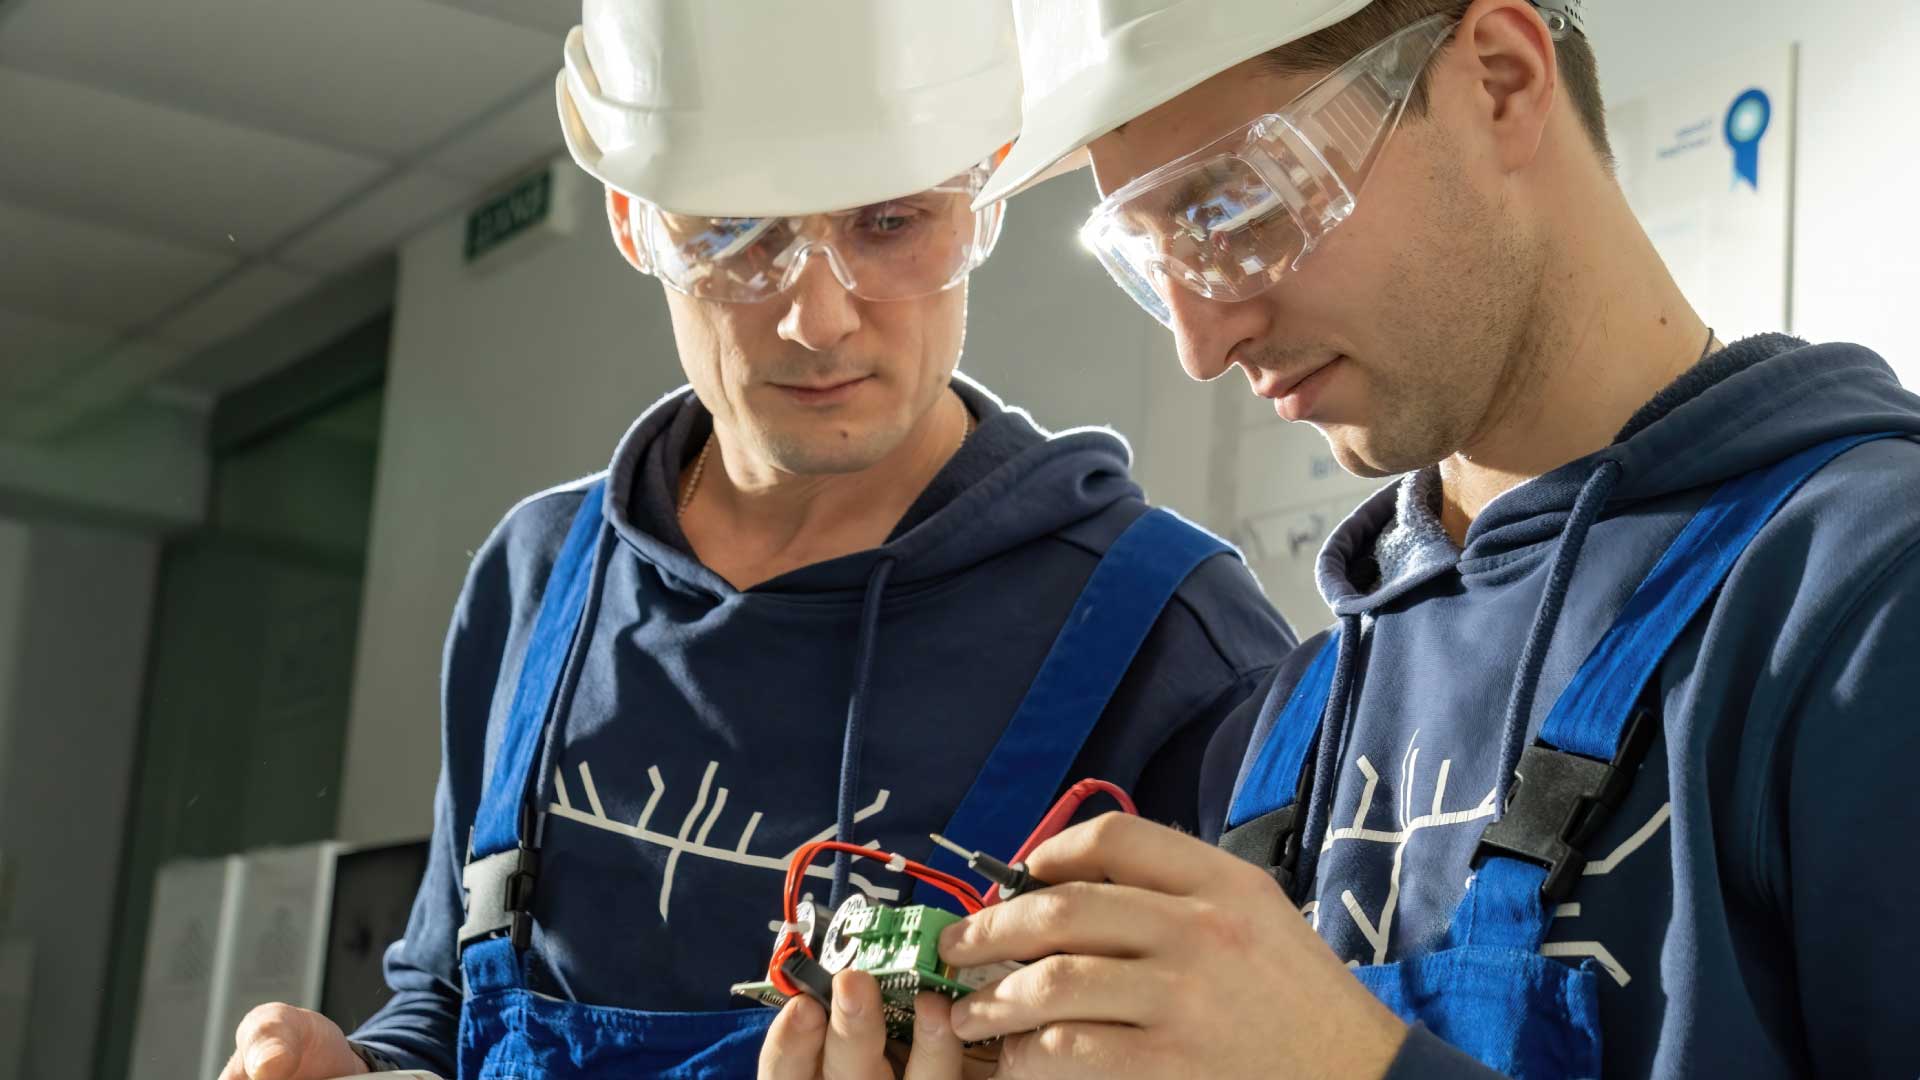 Two people in manufacturing building inspecting a device.